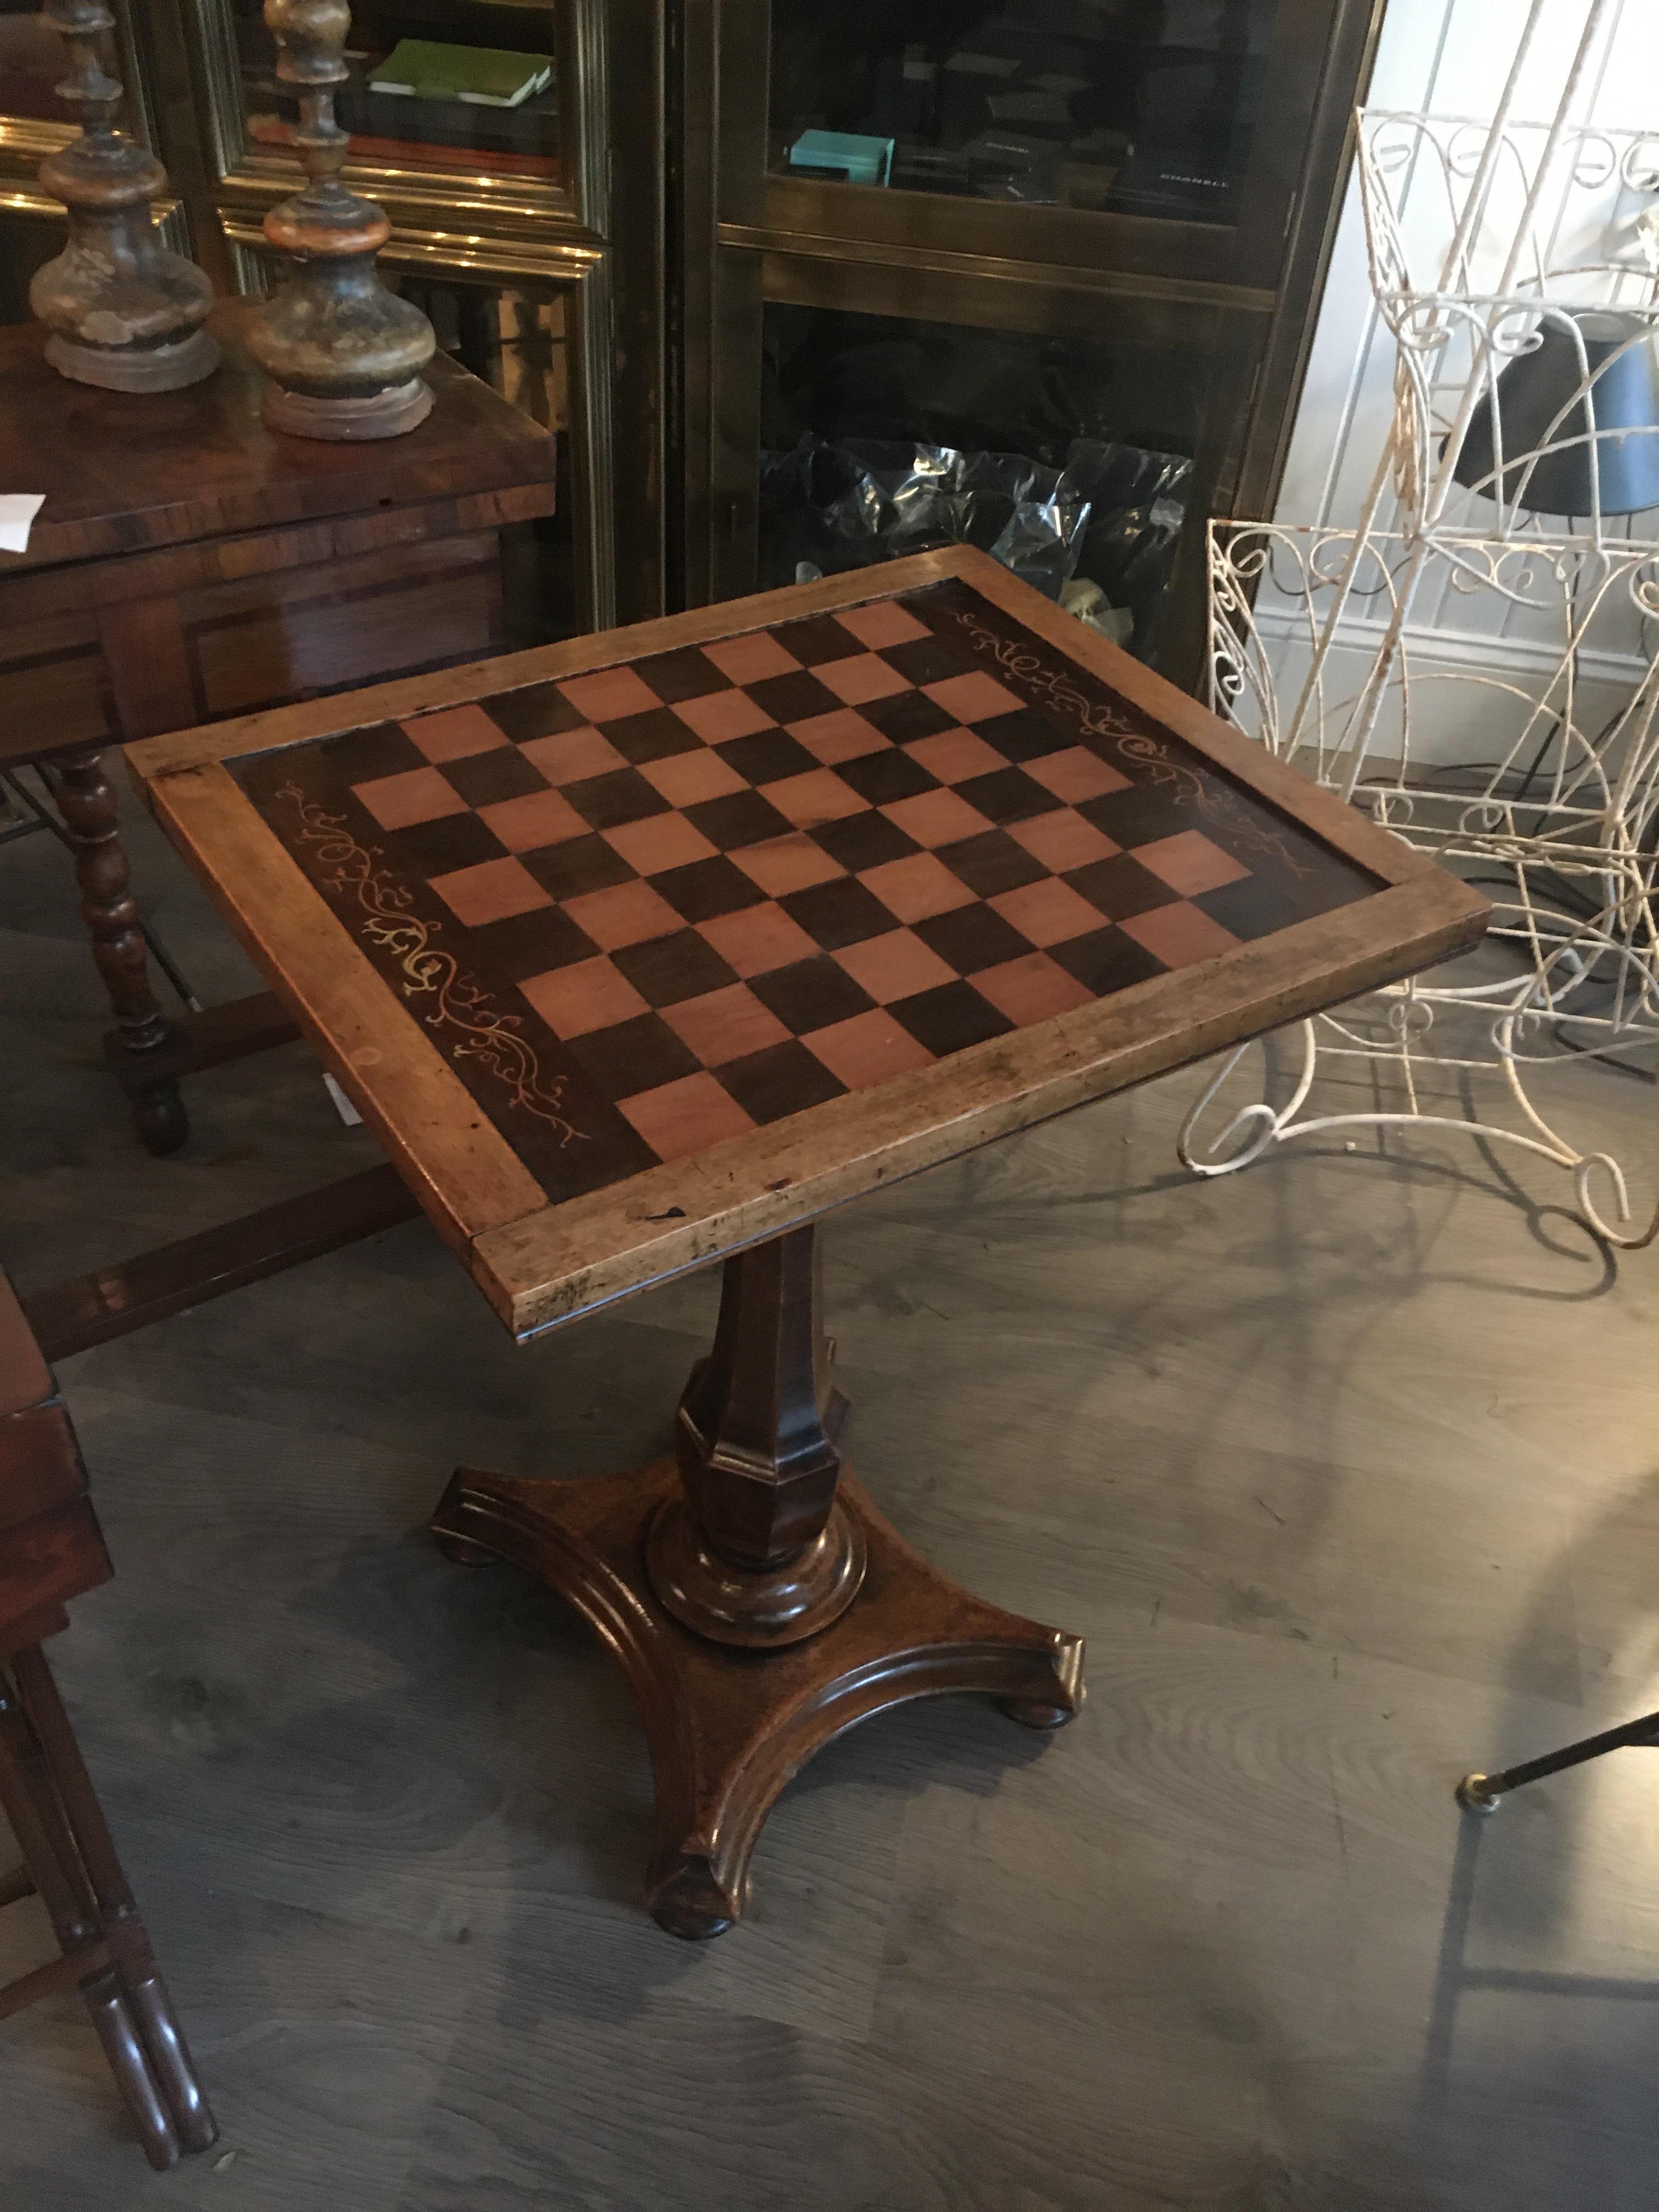 19th English Walnut Games Table, Top Flips For Both Chess And Cribbage/bsckgammo 4